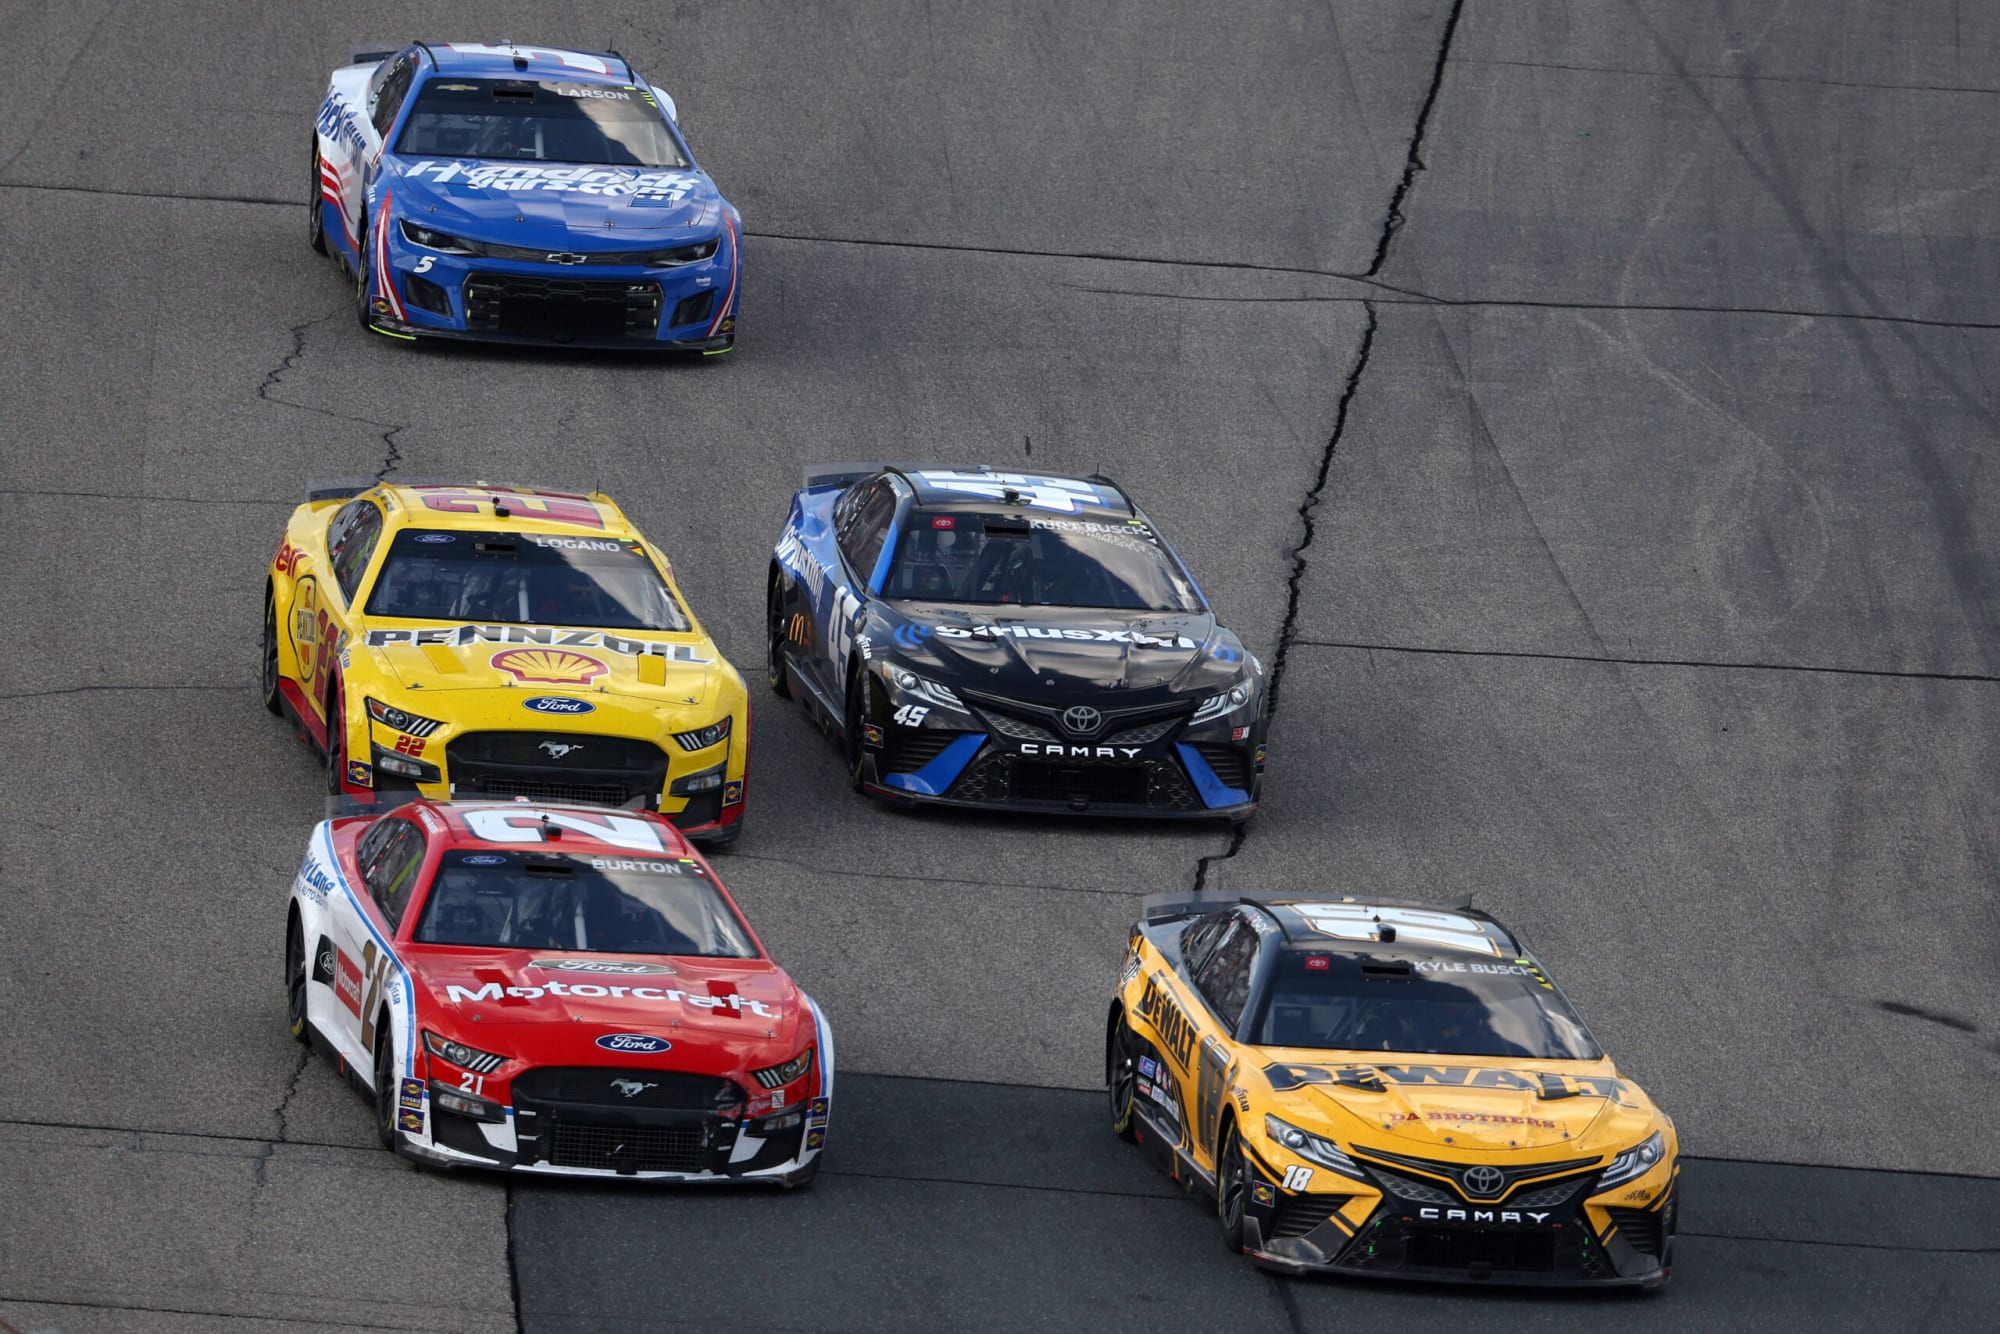 NASCAR New Hampshire race not being broadcast on NBC